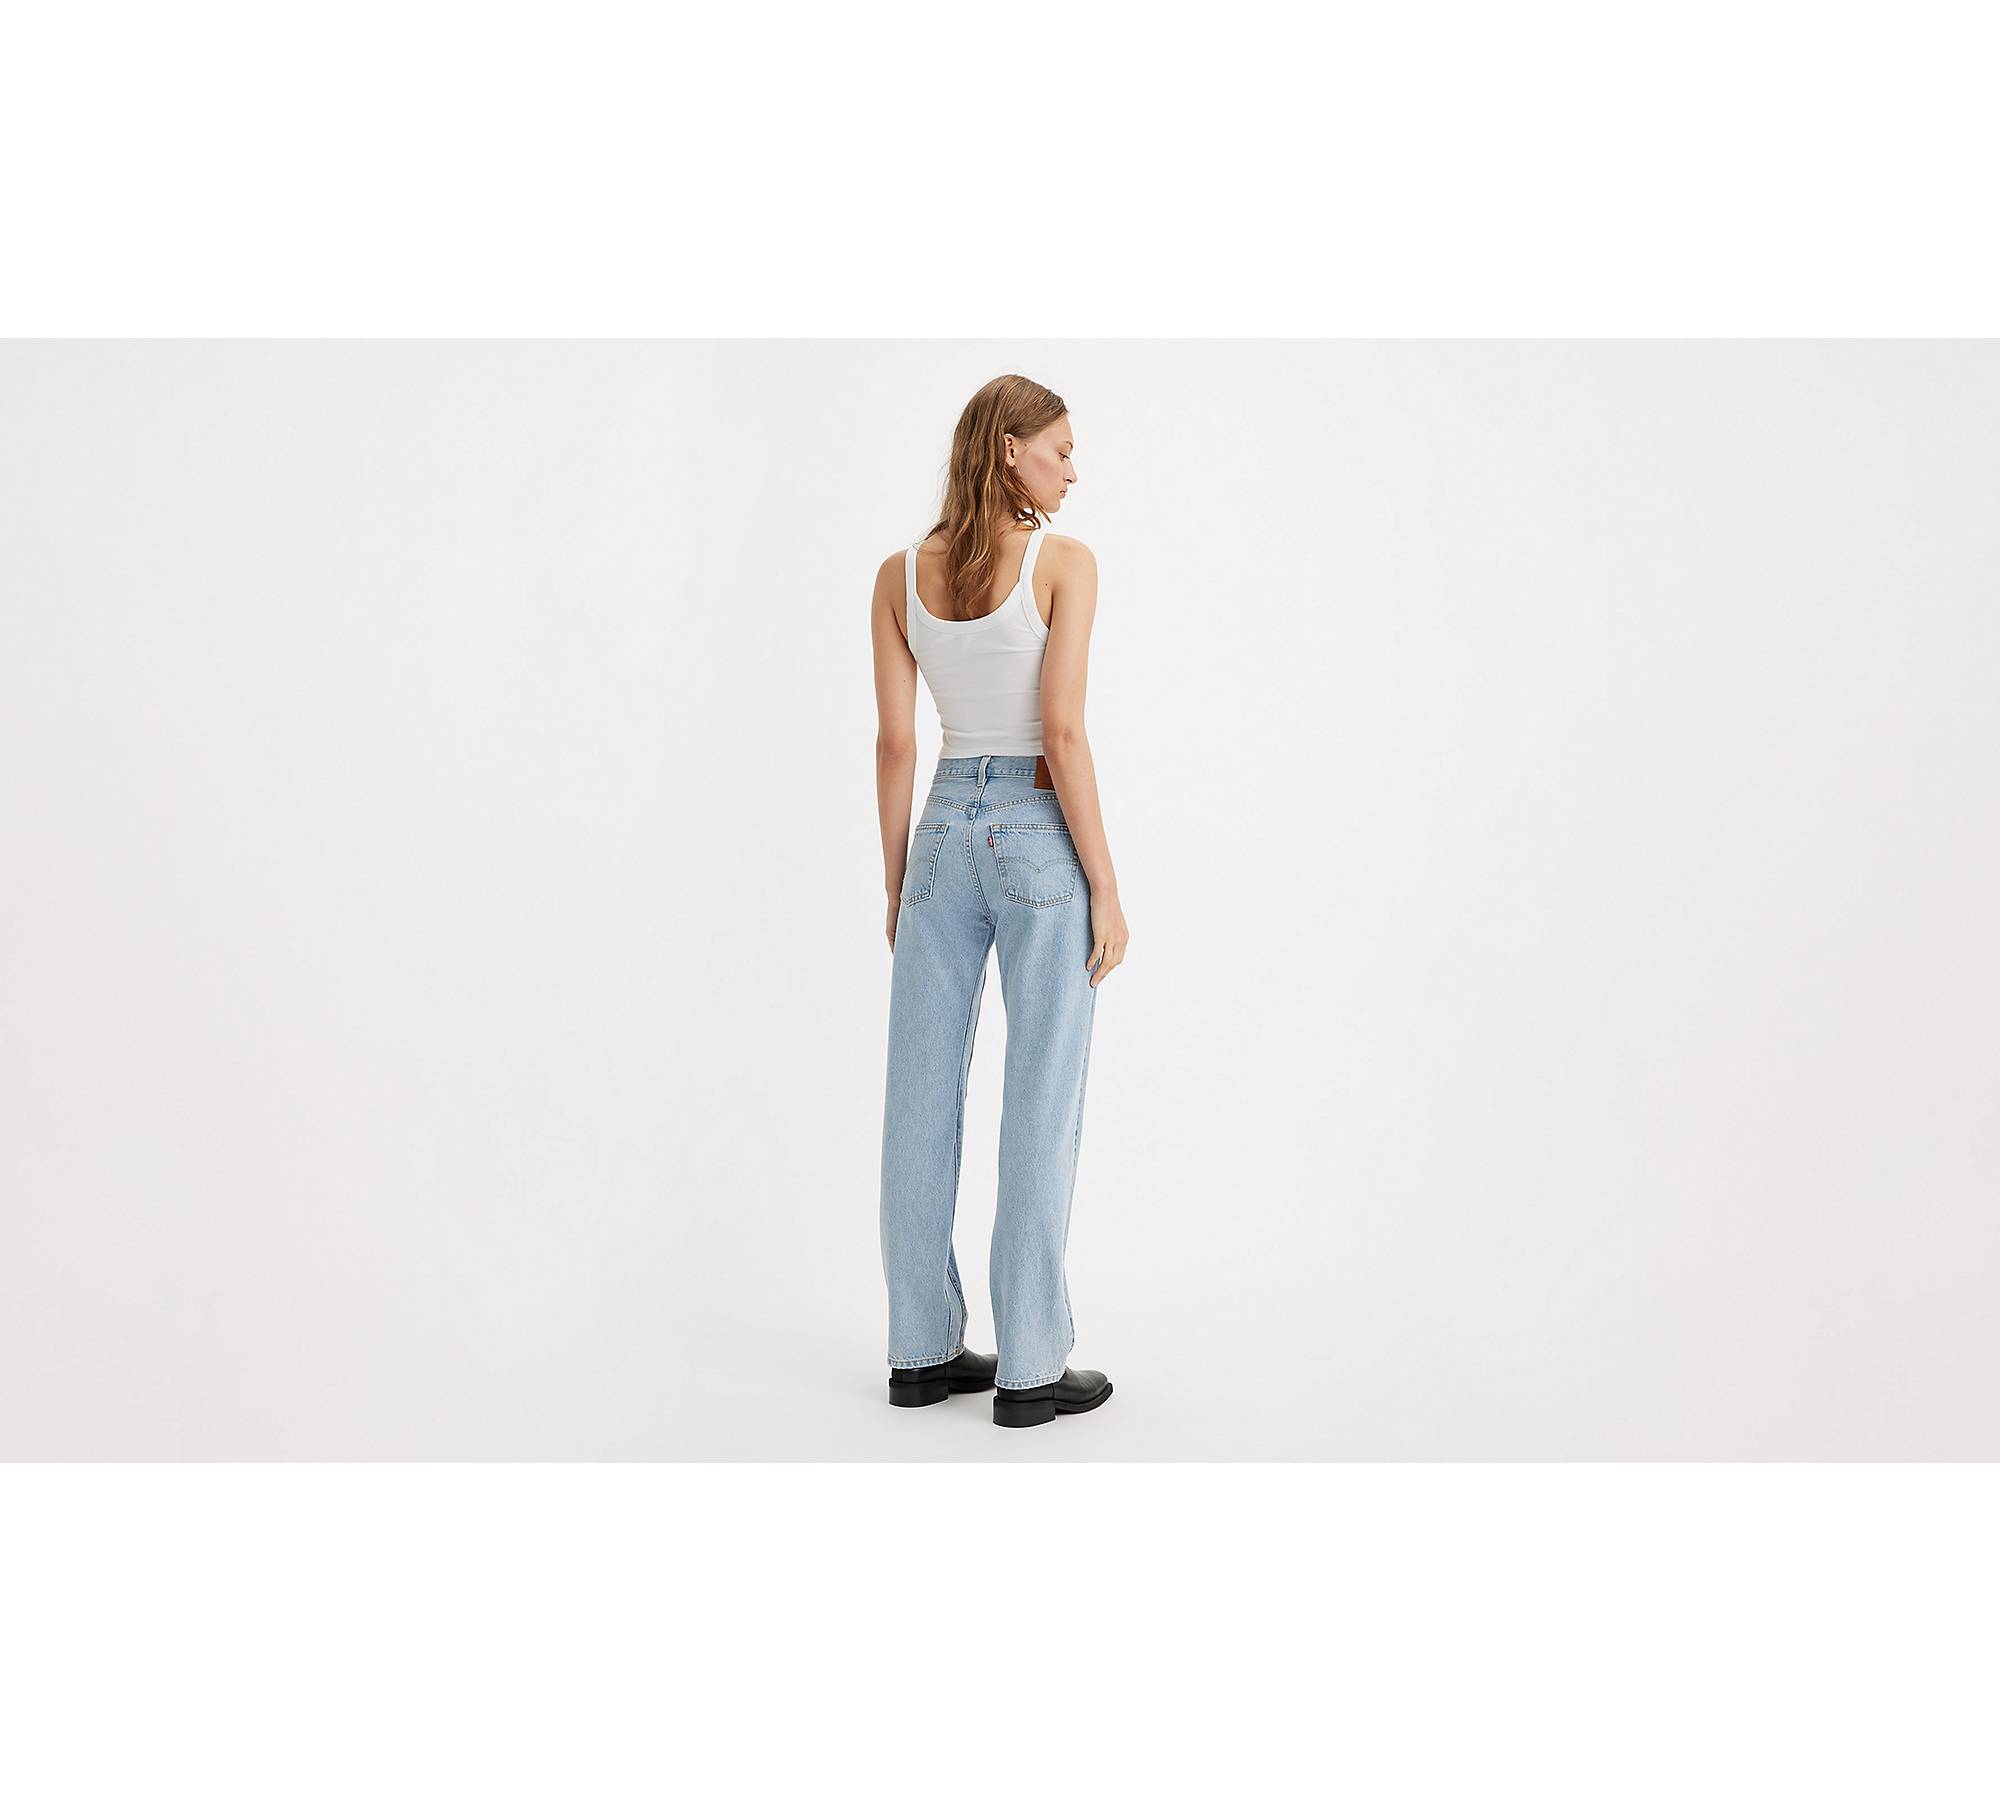 Buy 90s Vintage High Rise Bootcut Jeans for CAD 108.00